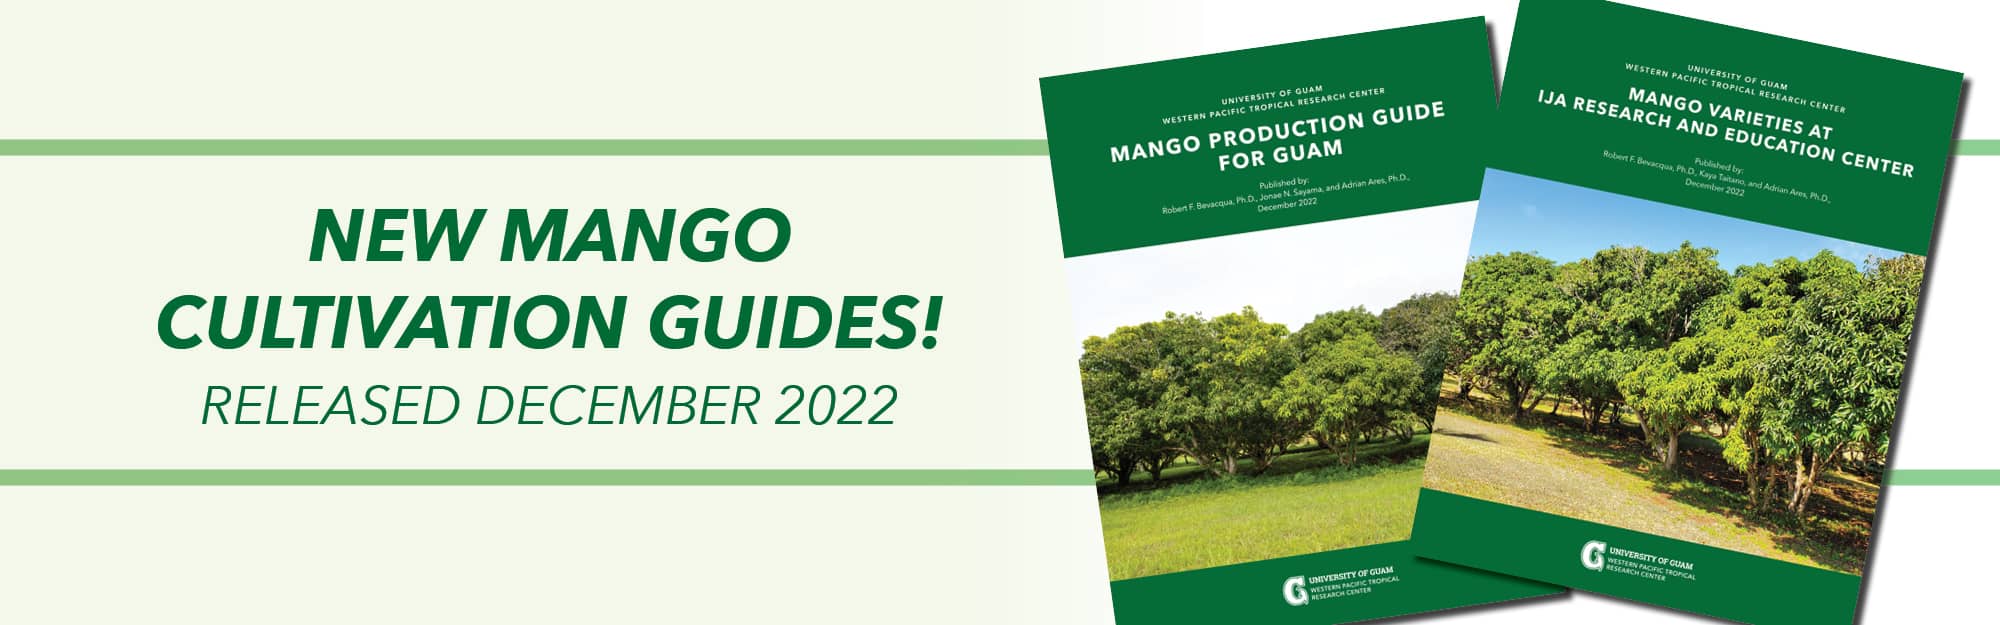 Banner linking to newly released mango cultivation guides